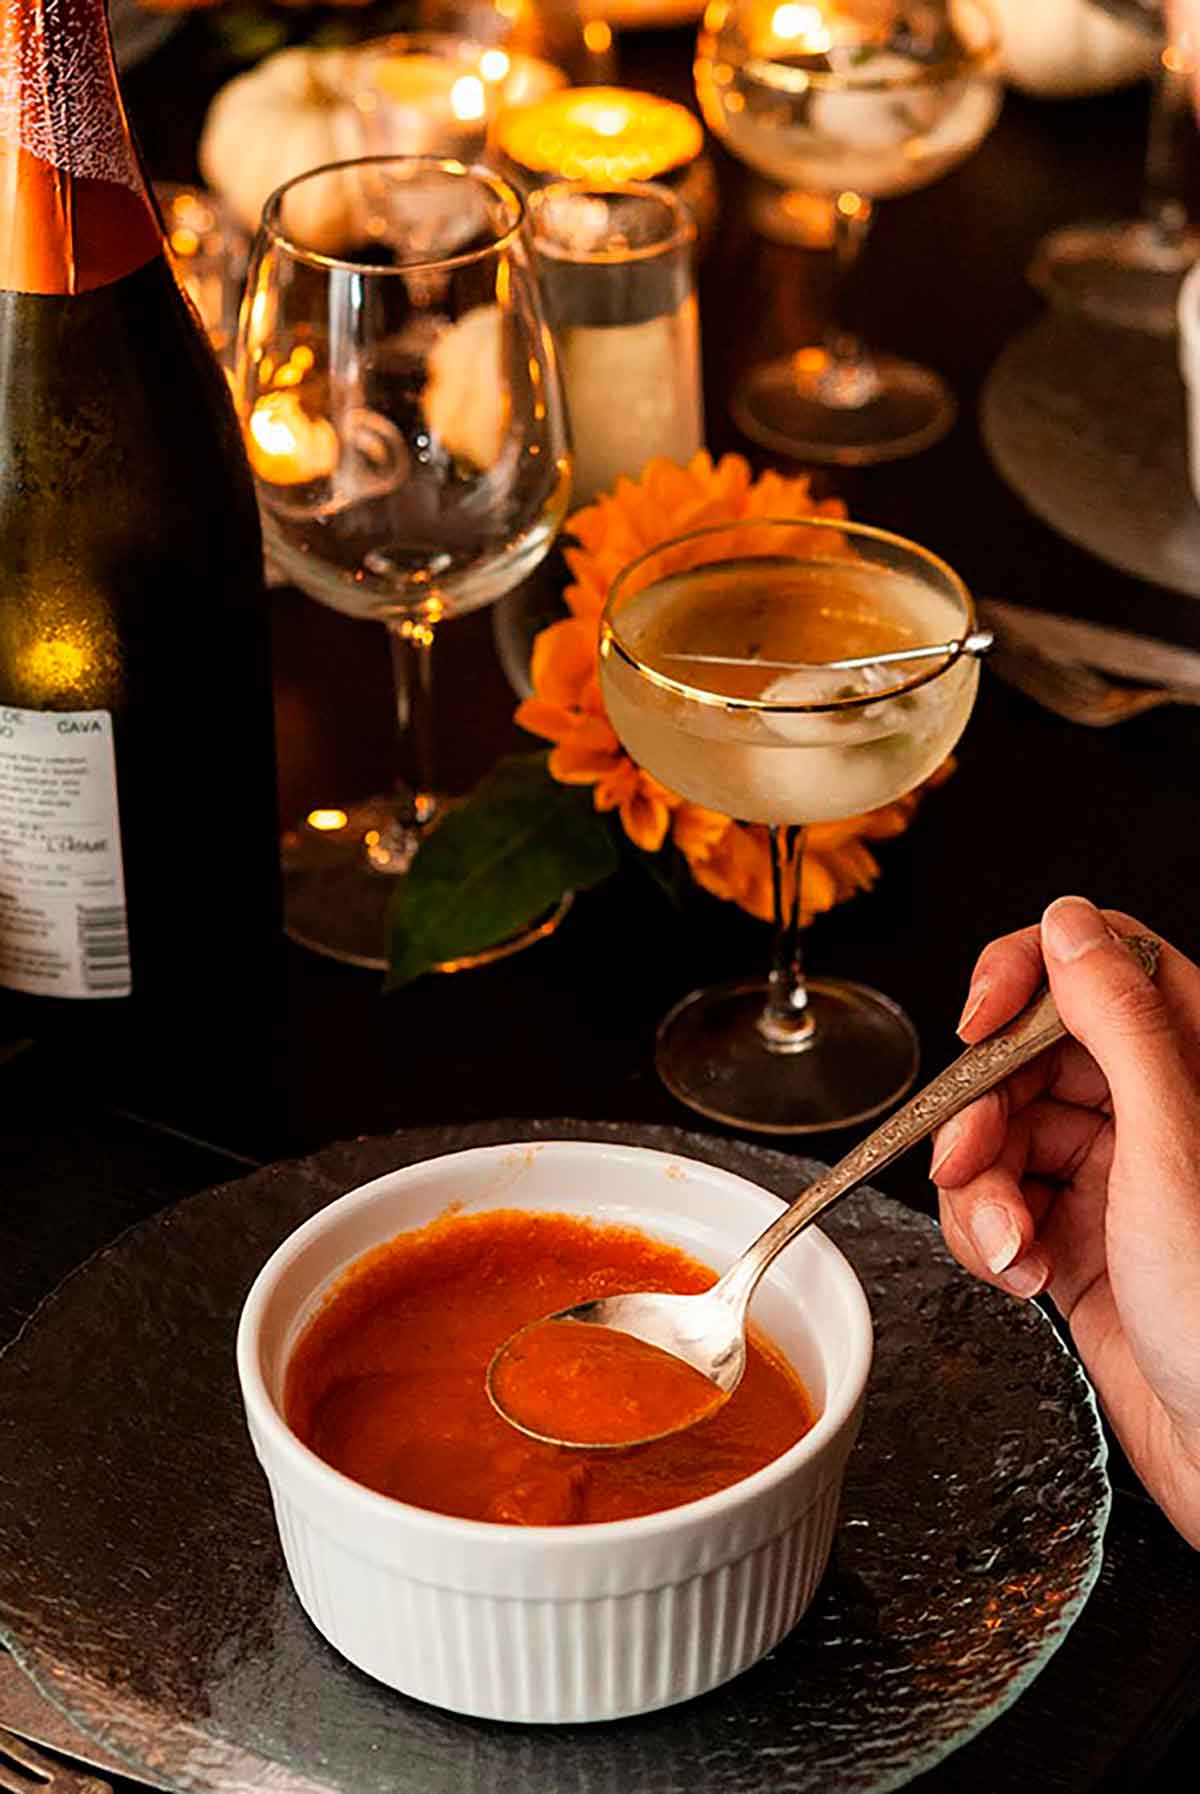 A hand holding a spoon of tomato soup over a bowl with cocktails, glassware, candles and a bottle of wine in the background.